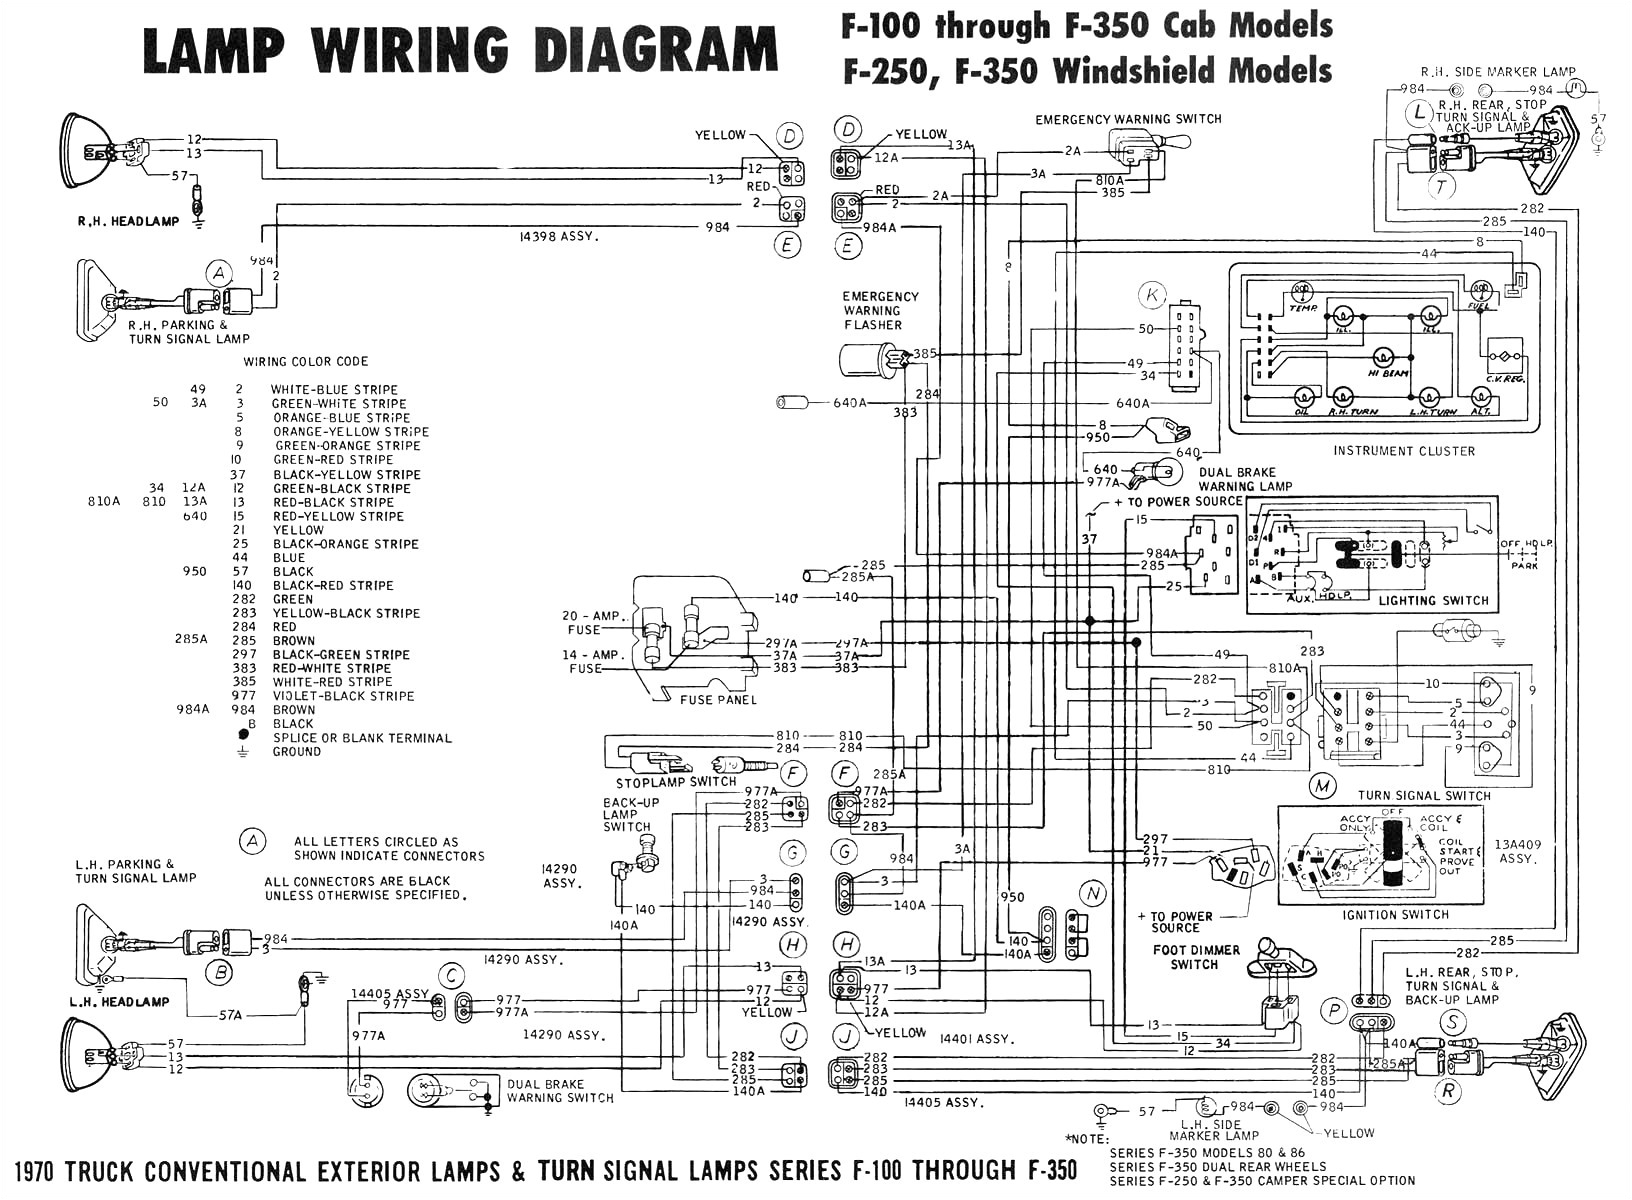 97 f350 wiring diagram wiring diagram show 2000 f250 wiring diagram overdrive